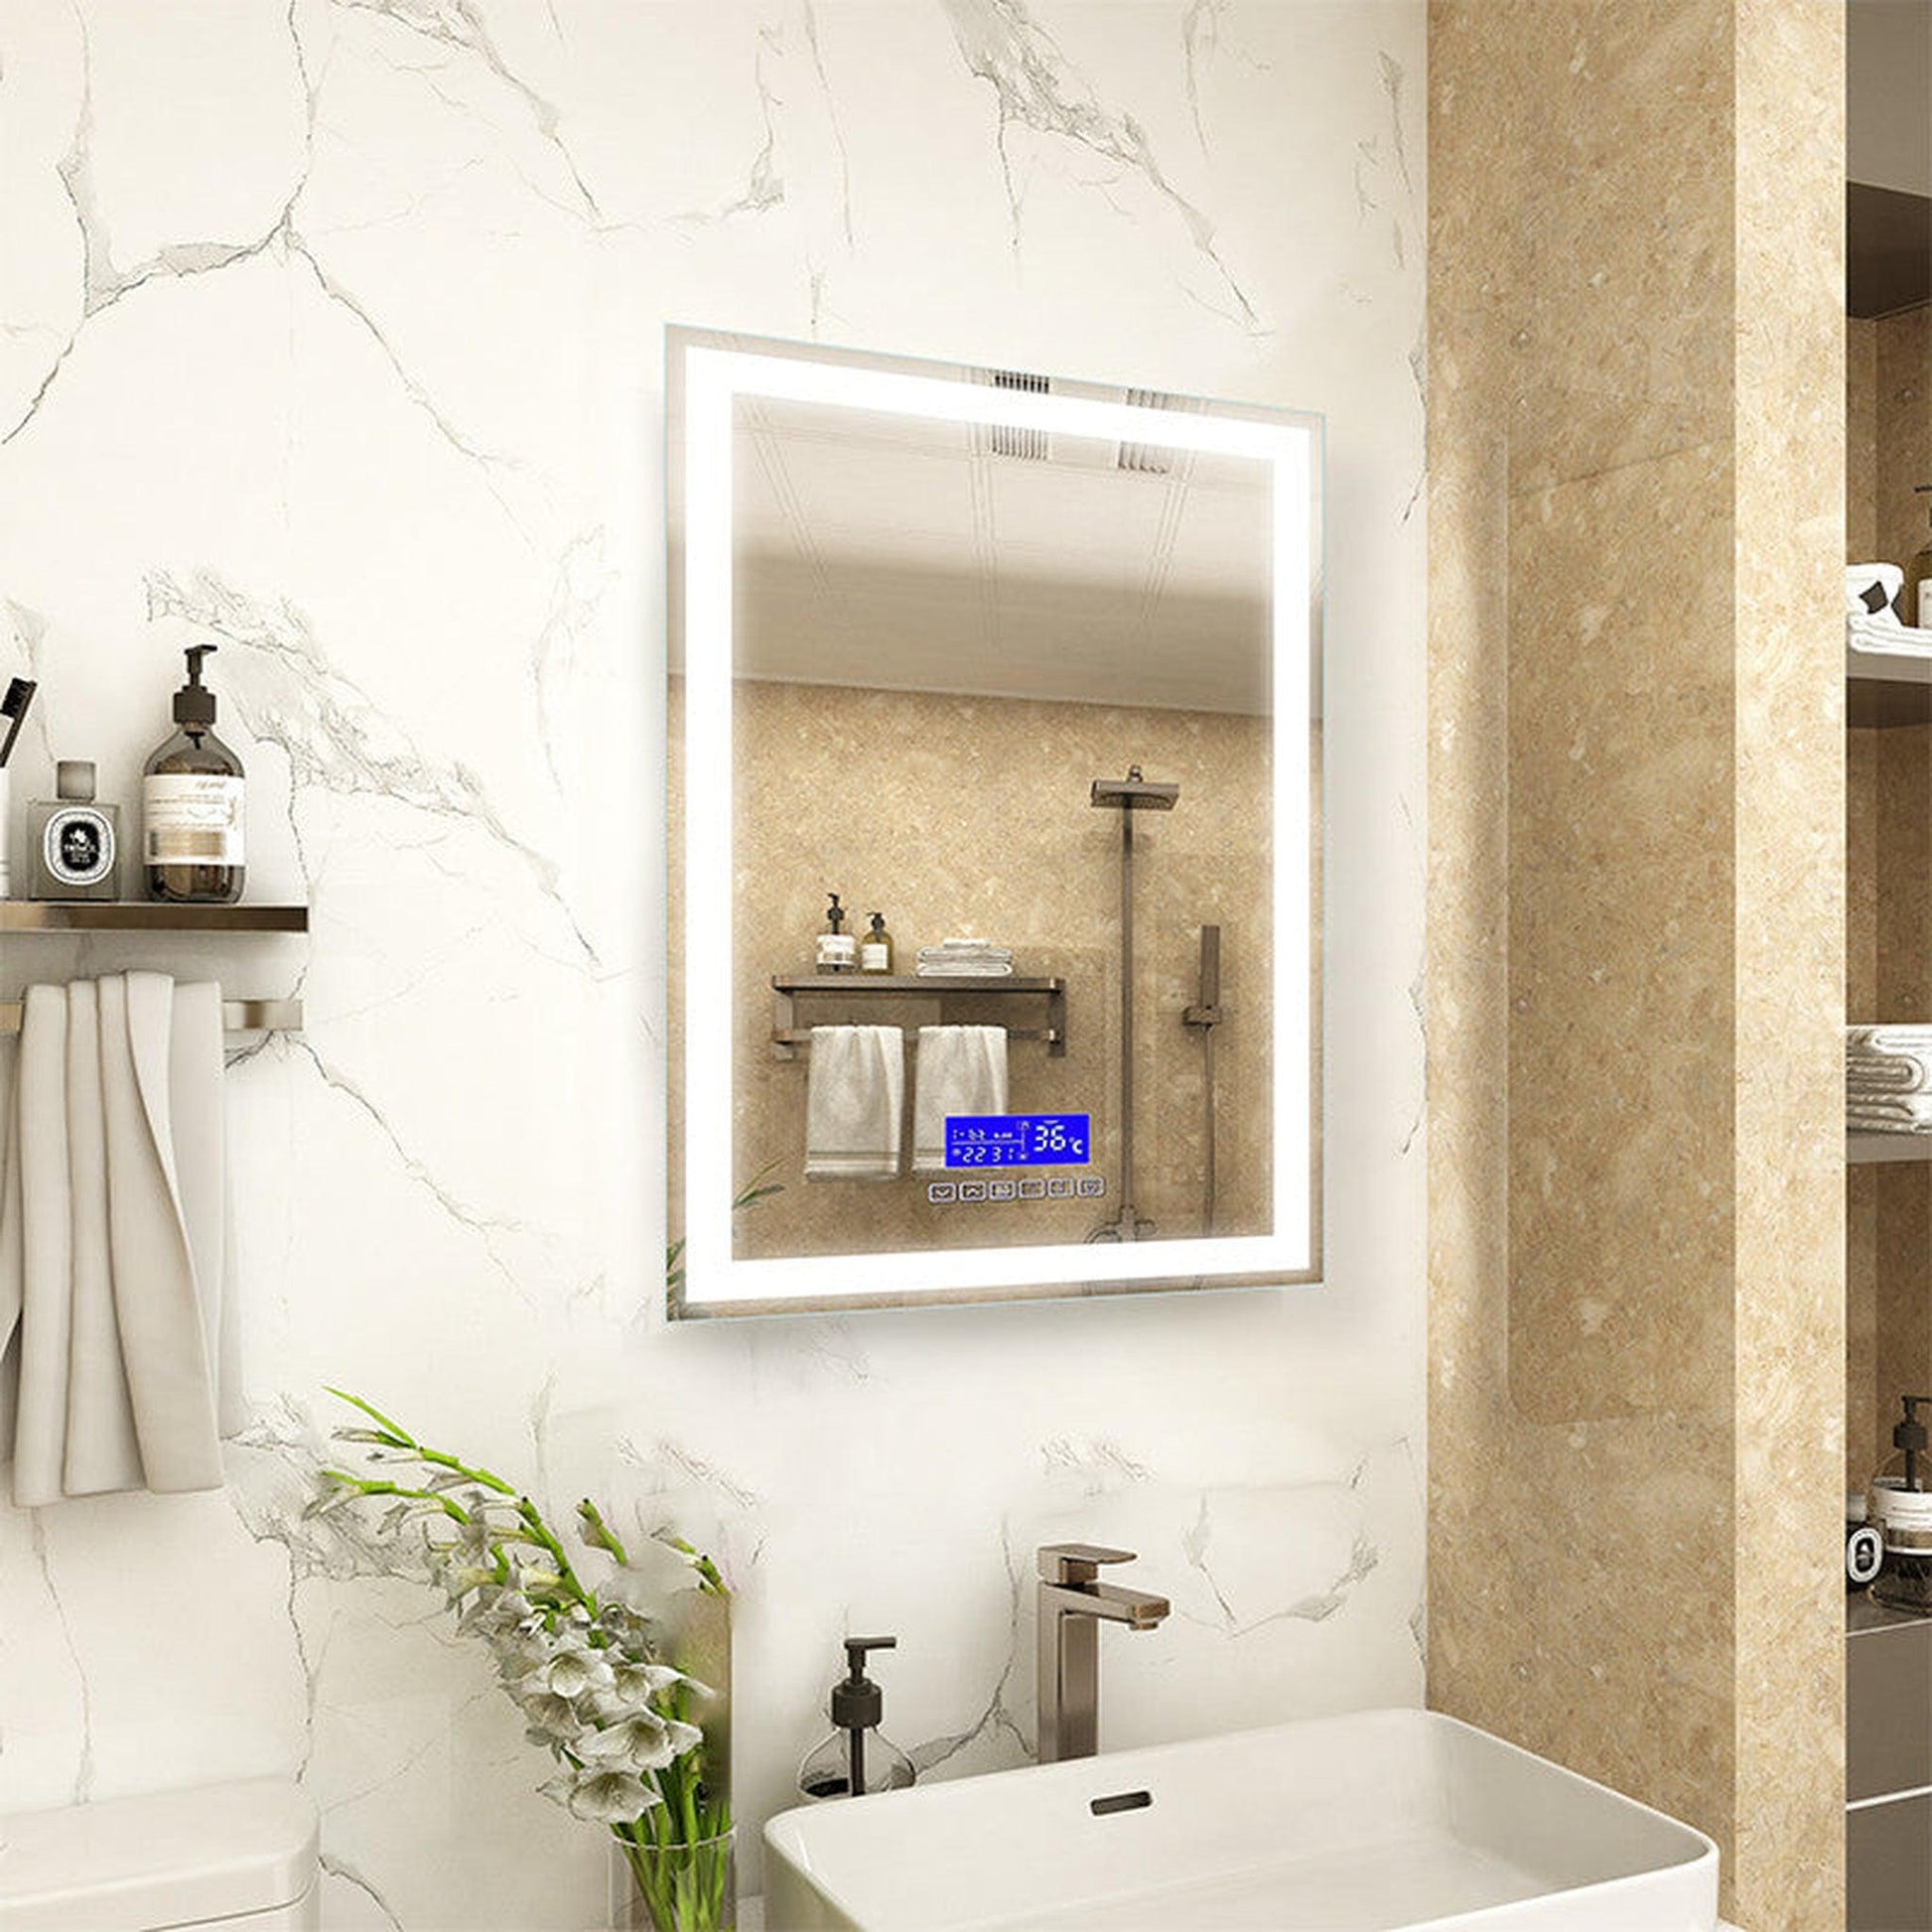 Moreno Florence 24" x 36" Frameless LED Mirror With Bluetooth, Time, and Temperature